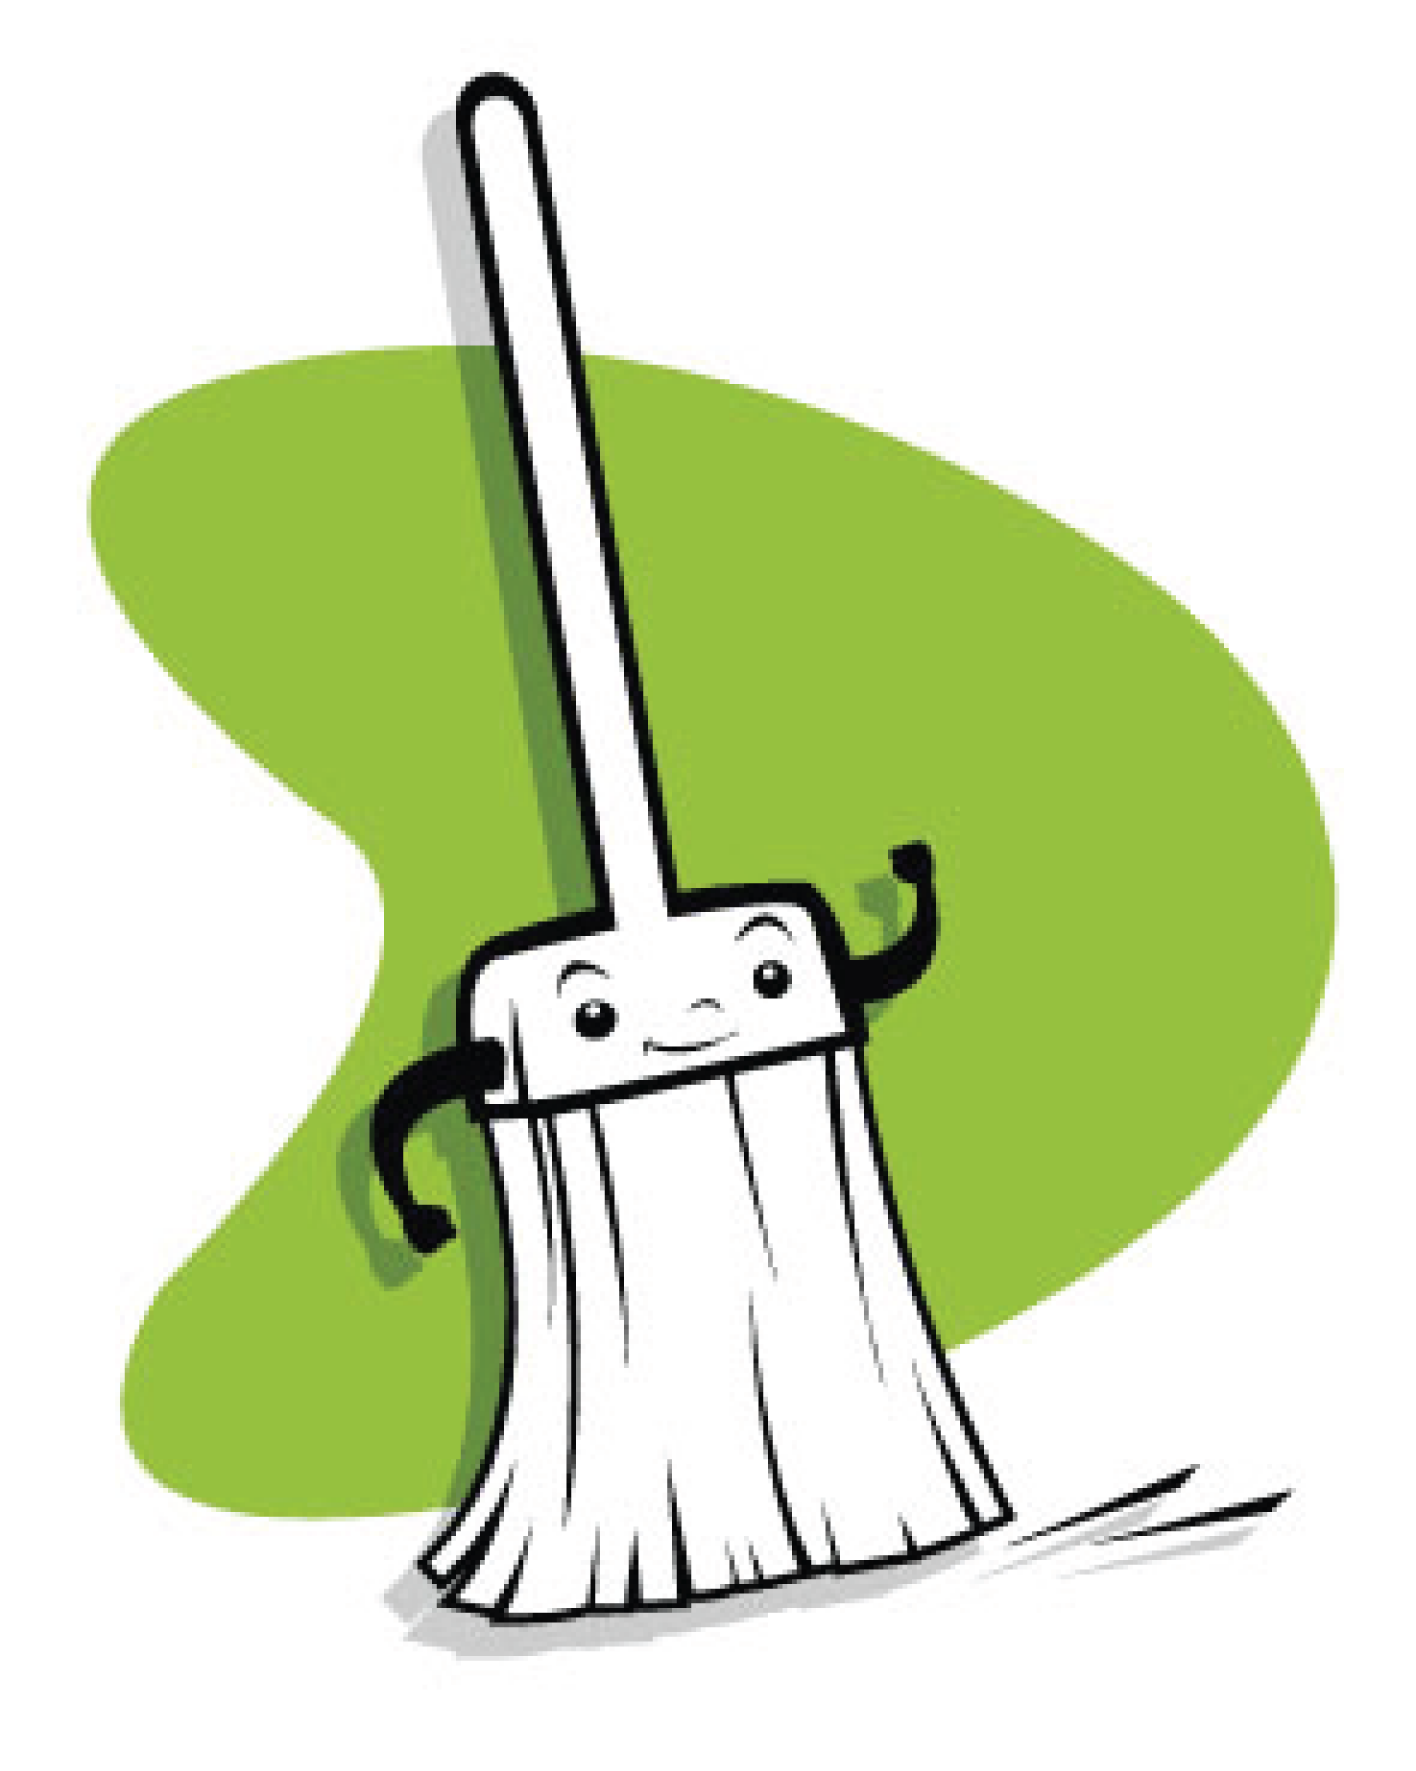 housekeeping clipart